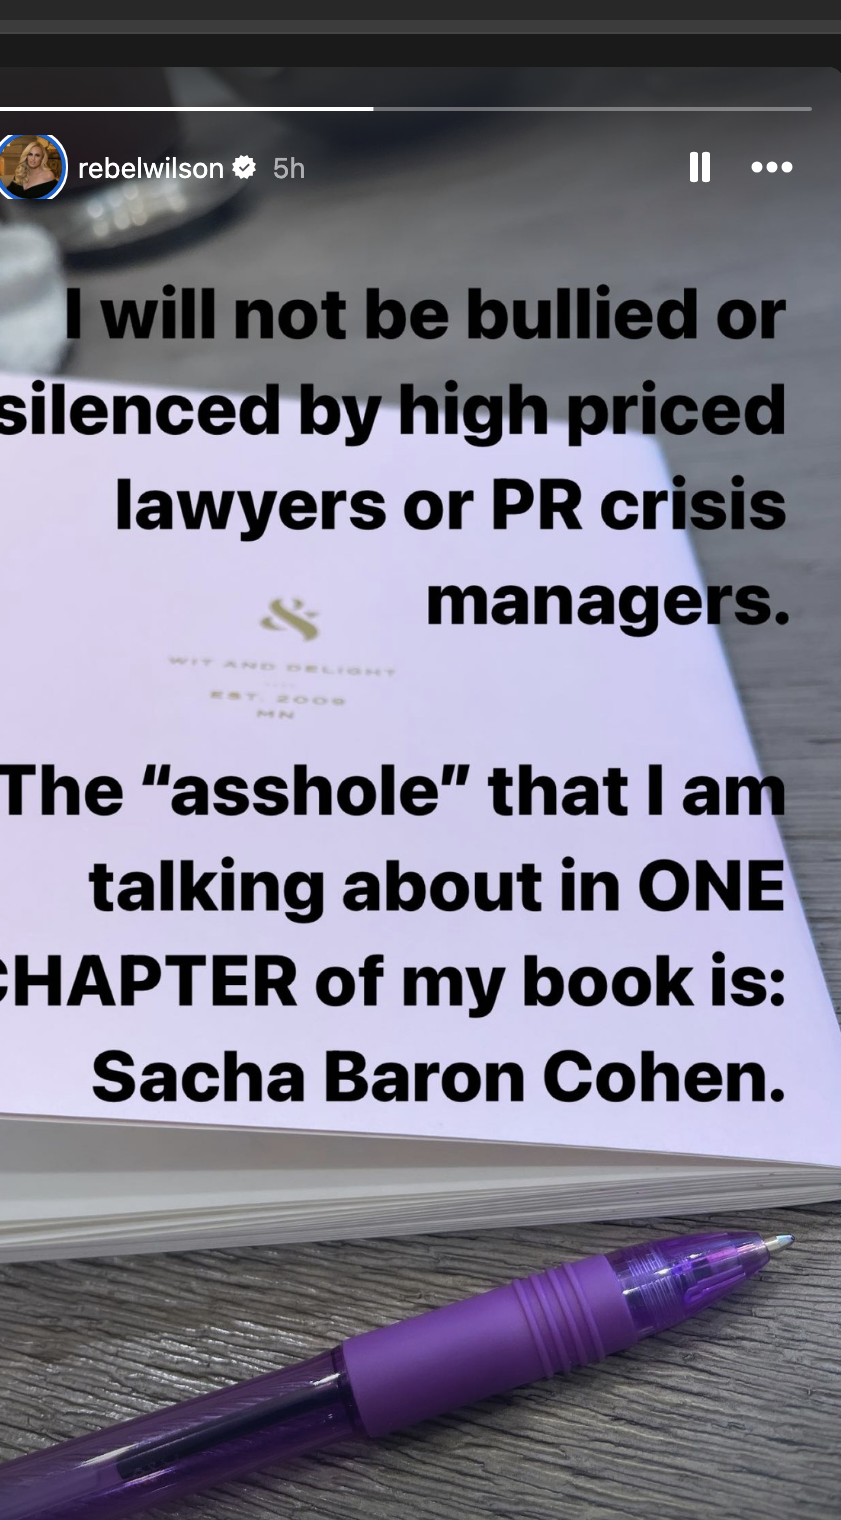 Screenshot of her IG story with a statement mentioning resistance to bullying by lawyers, naming Sacha Baron Cohen in a book chapter controversy